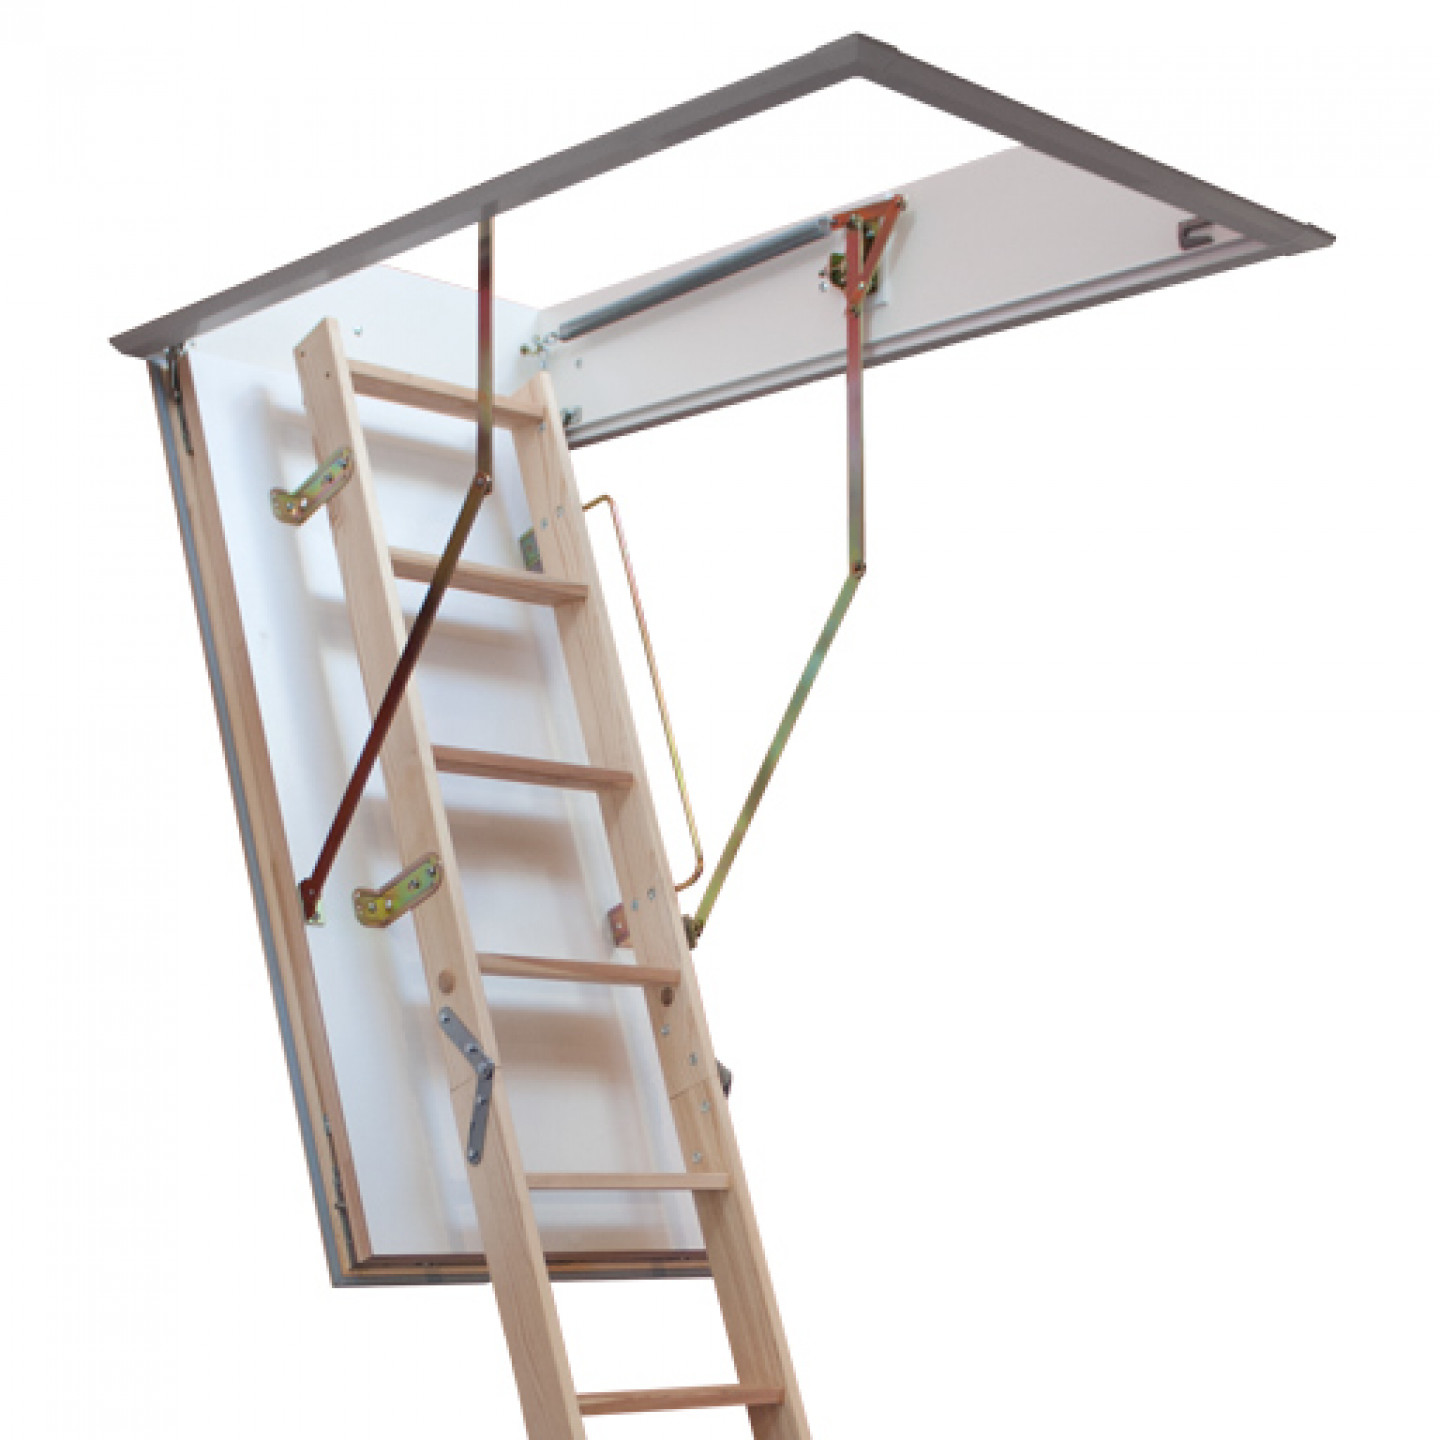 What are the benefits of installing a Loft Ladder?